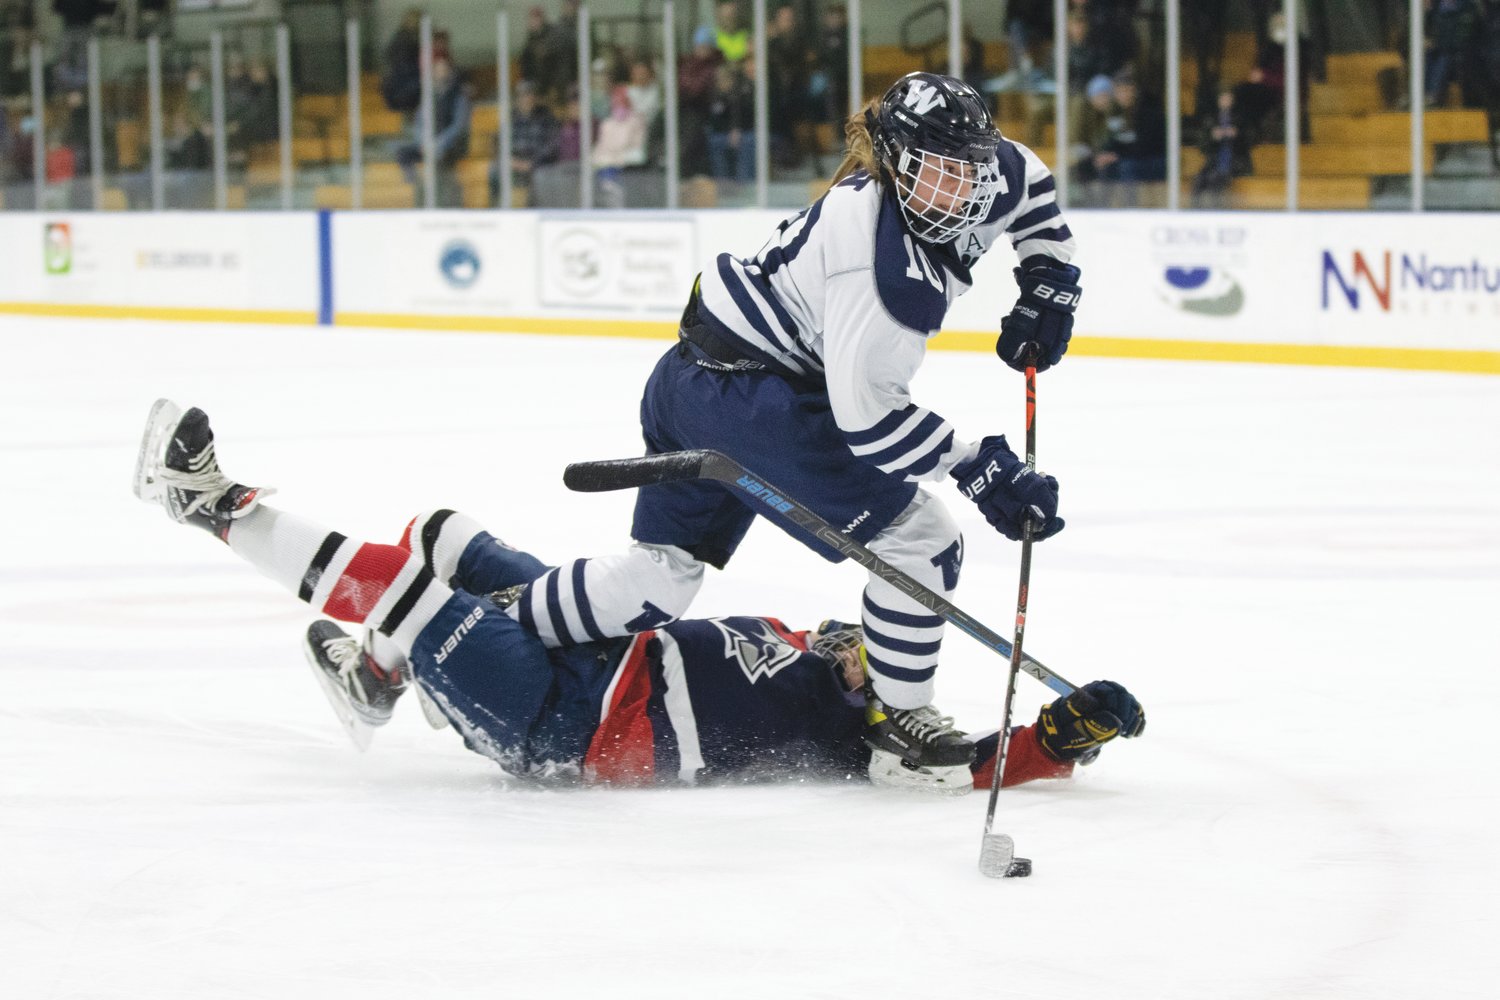 Claire Misurelli levels a Brookline player and stays up with the puck.